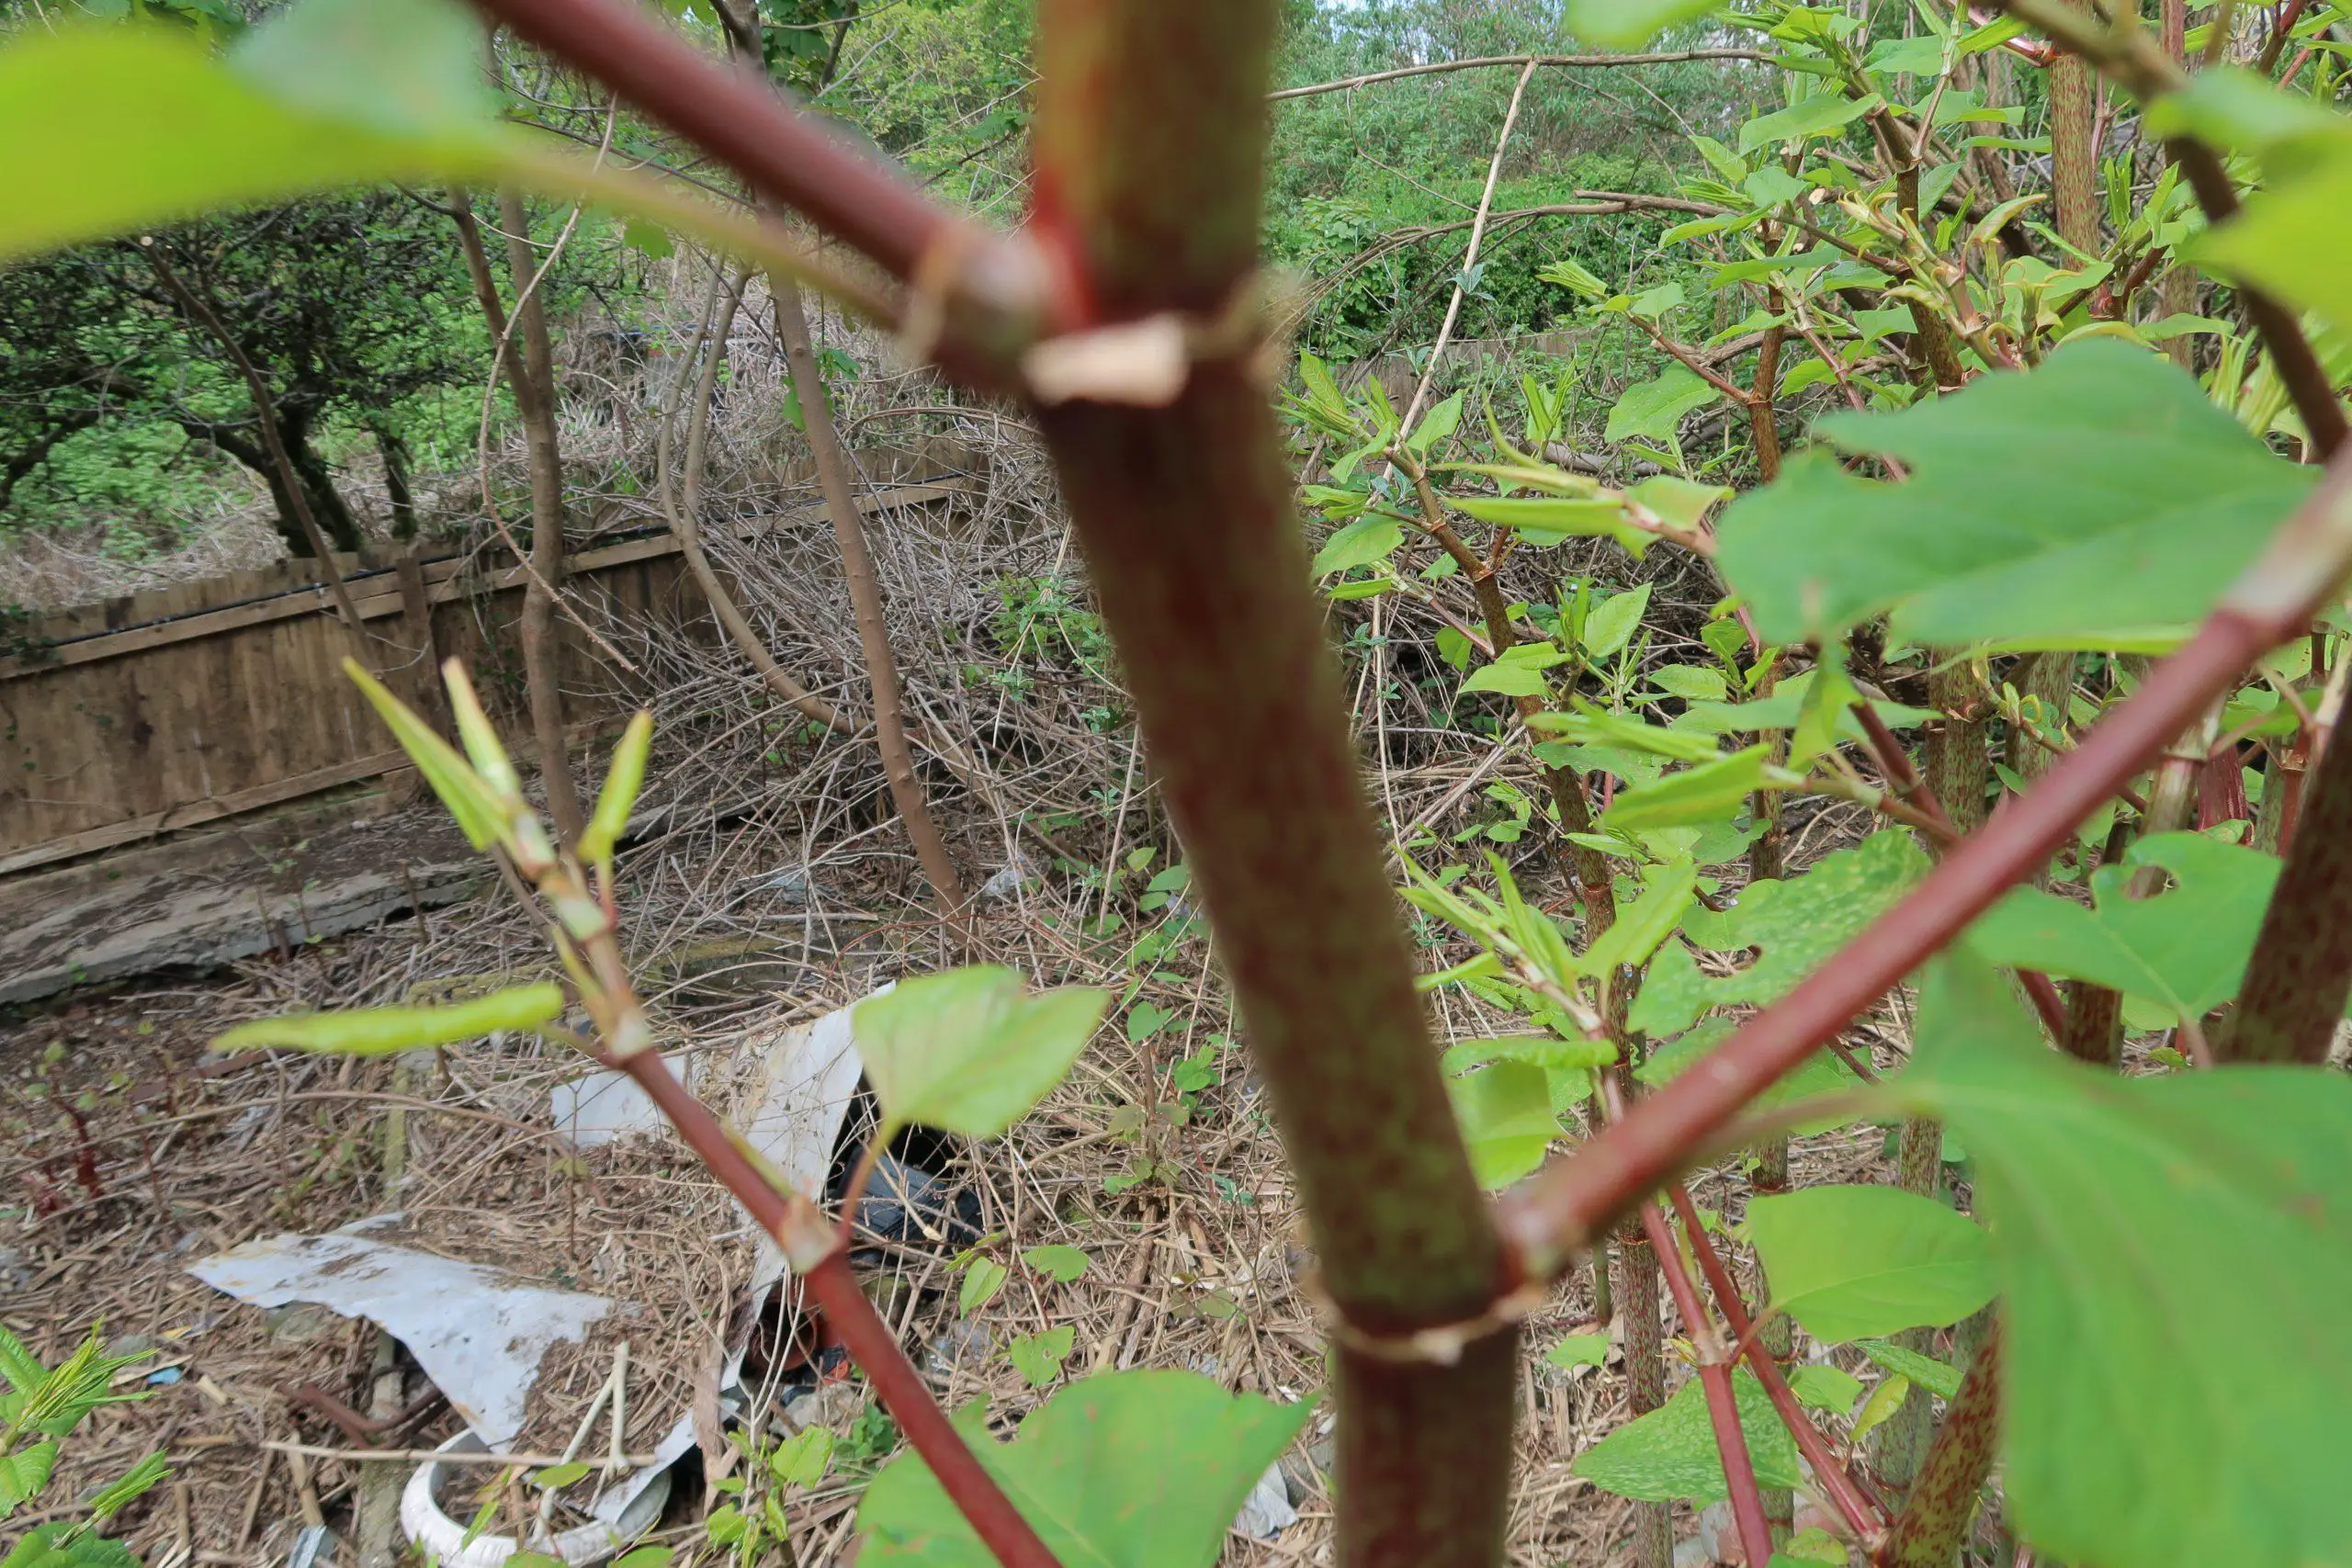 Is Japanese knotweed poisonous or not